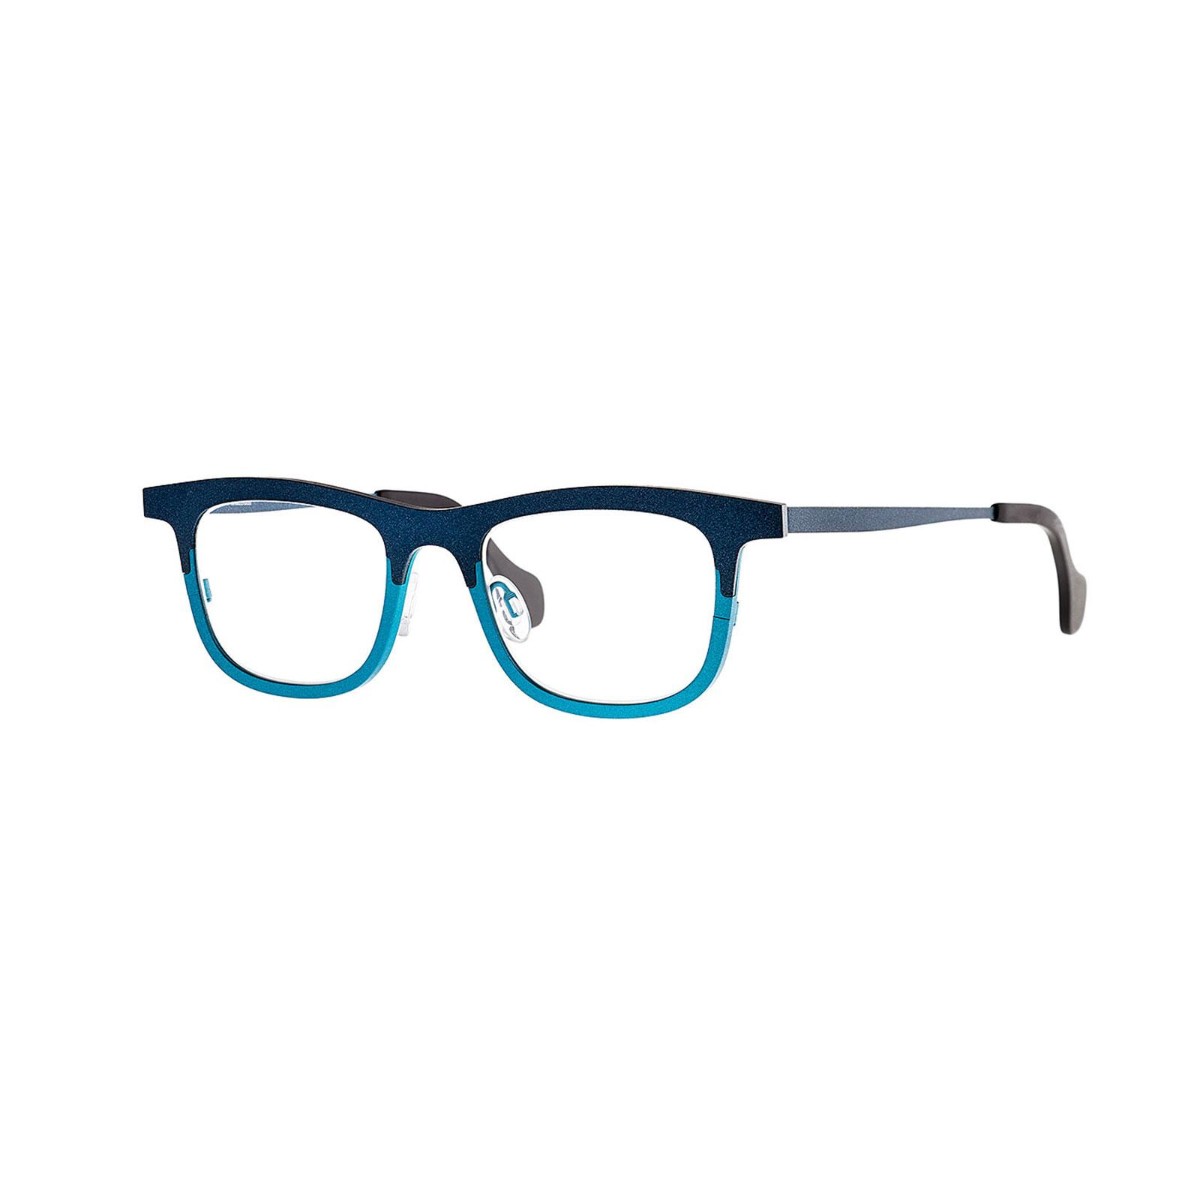 Theo - Mille+54 313 Blue / Teal